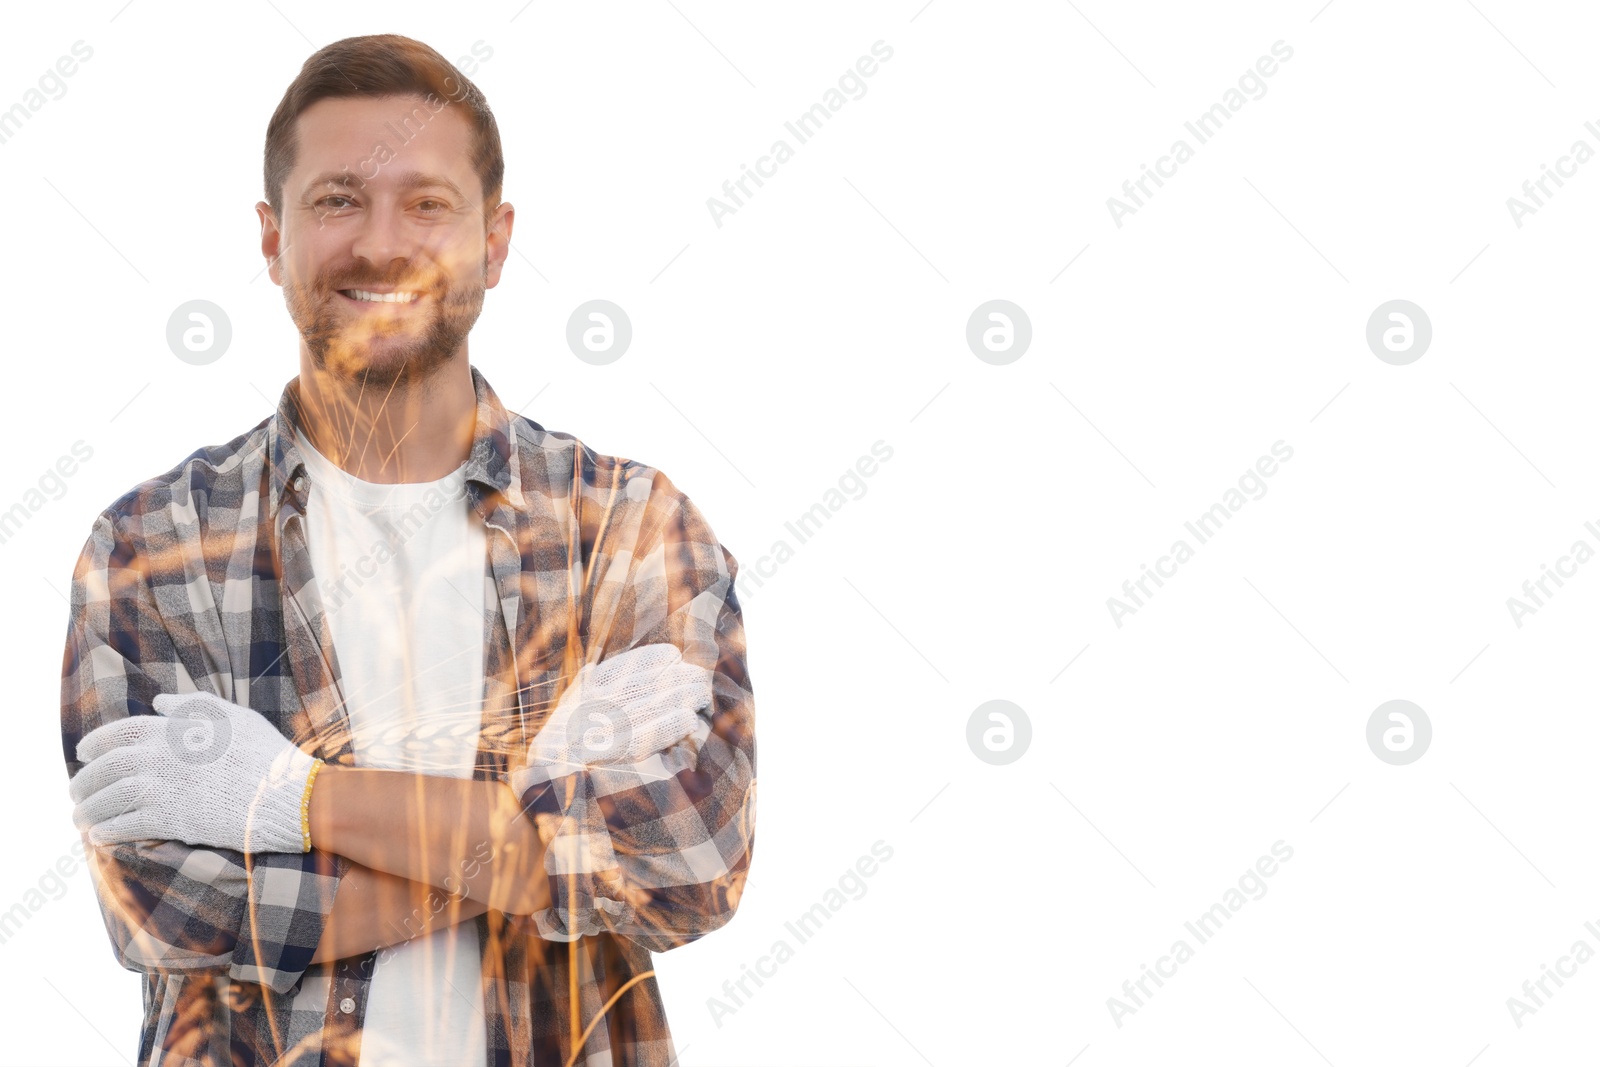 Image of Double exposure of happy farmer and wheat field on white background